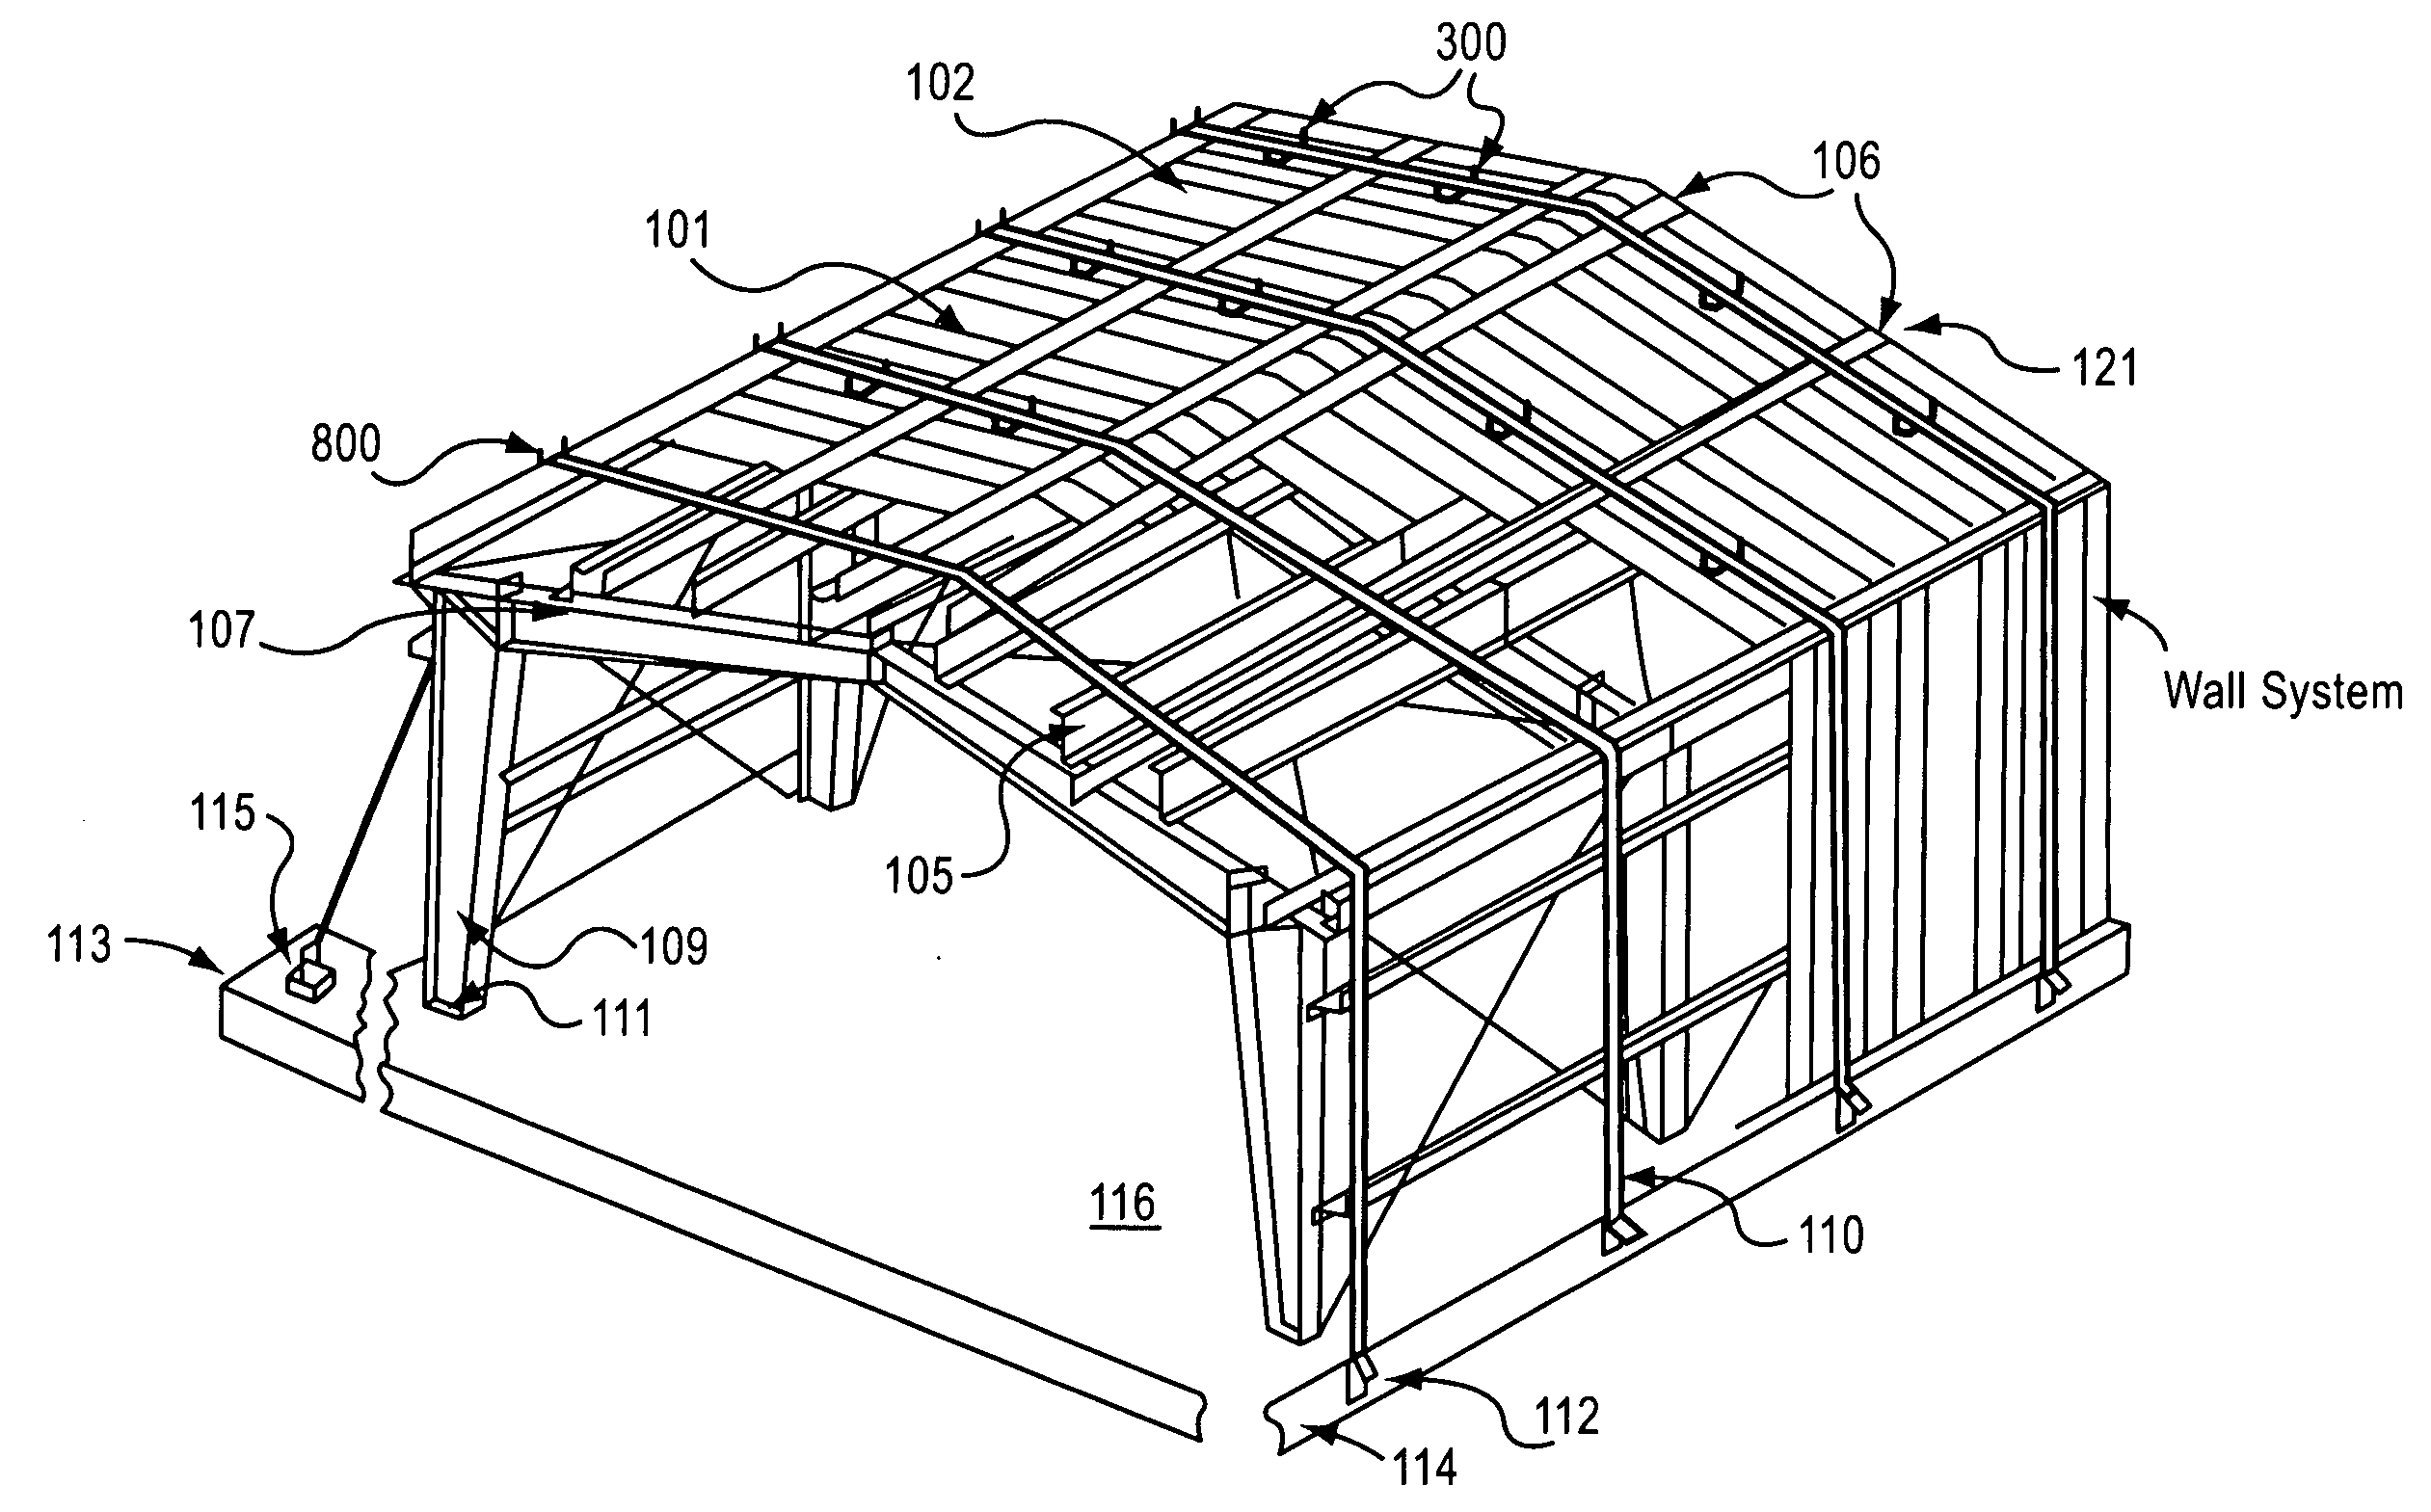 Apparatus and method for securing a roof assembly during a severe wind storm